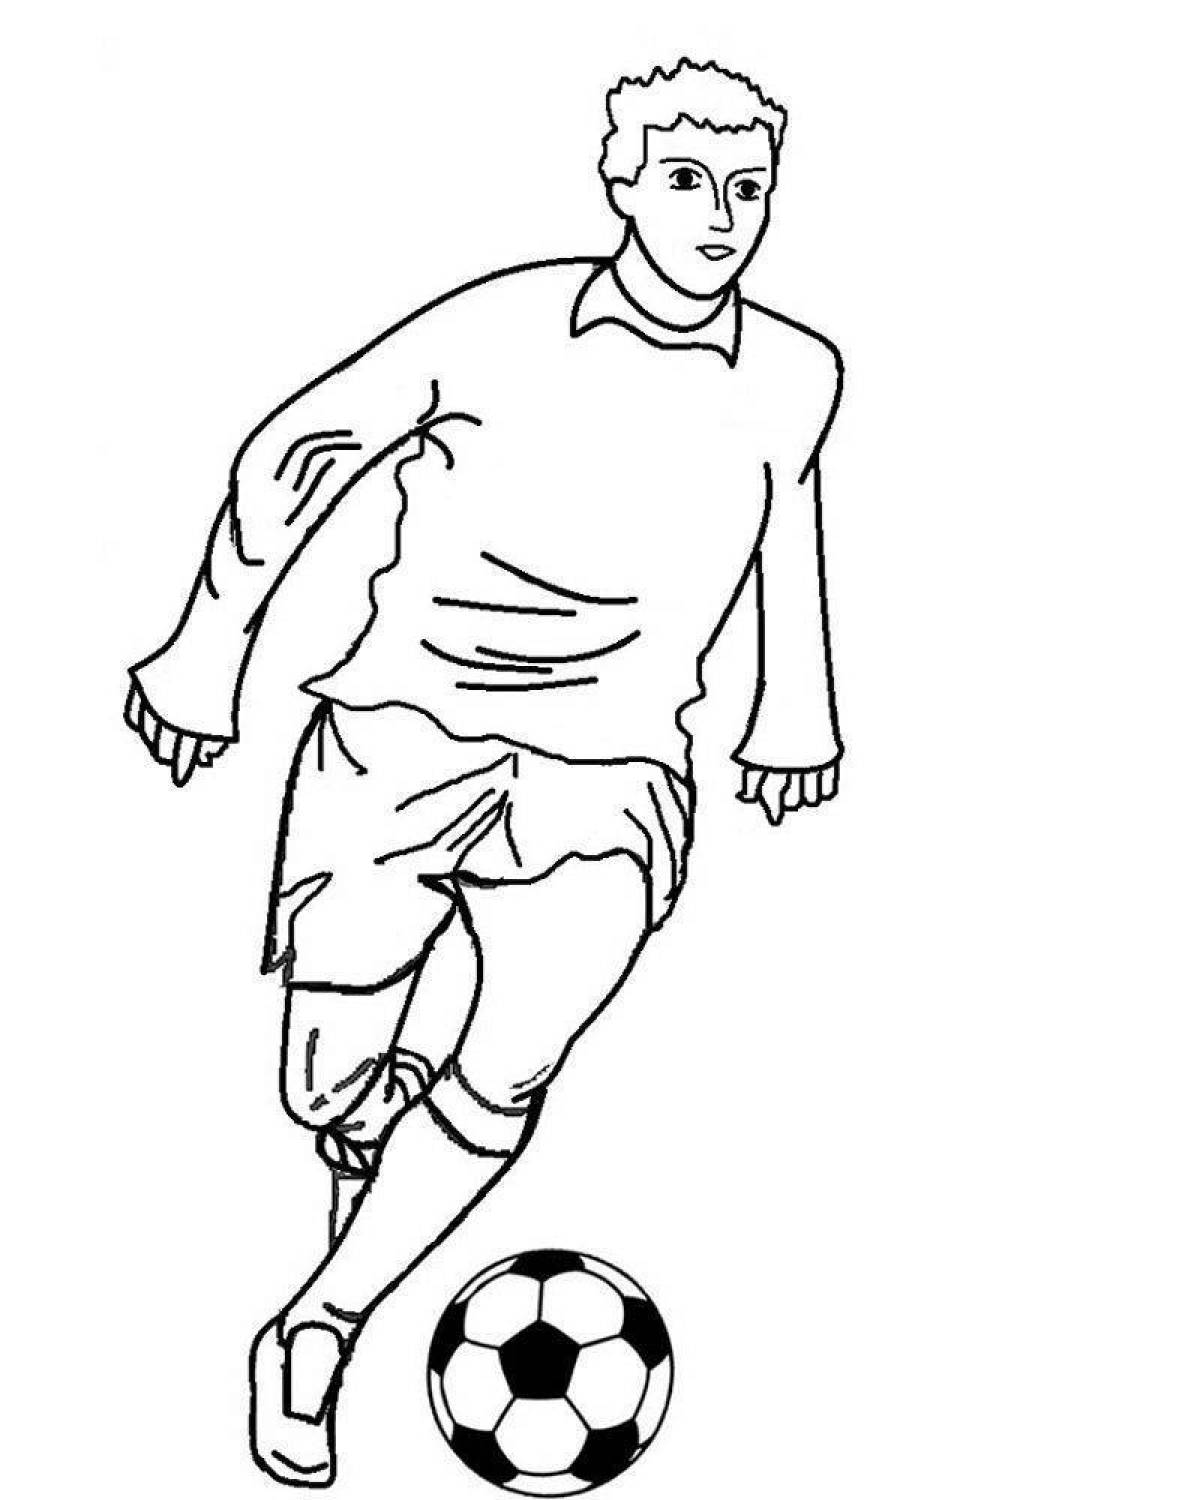 Coloring page bright football player